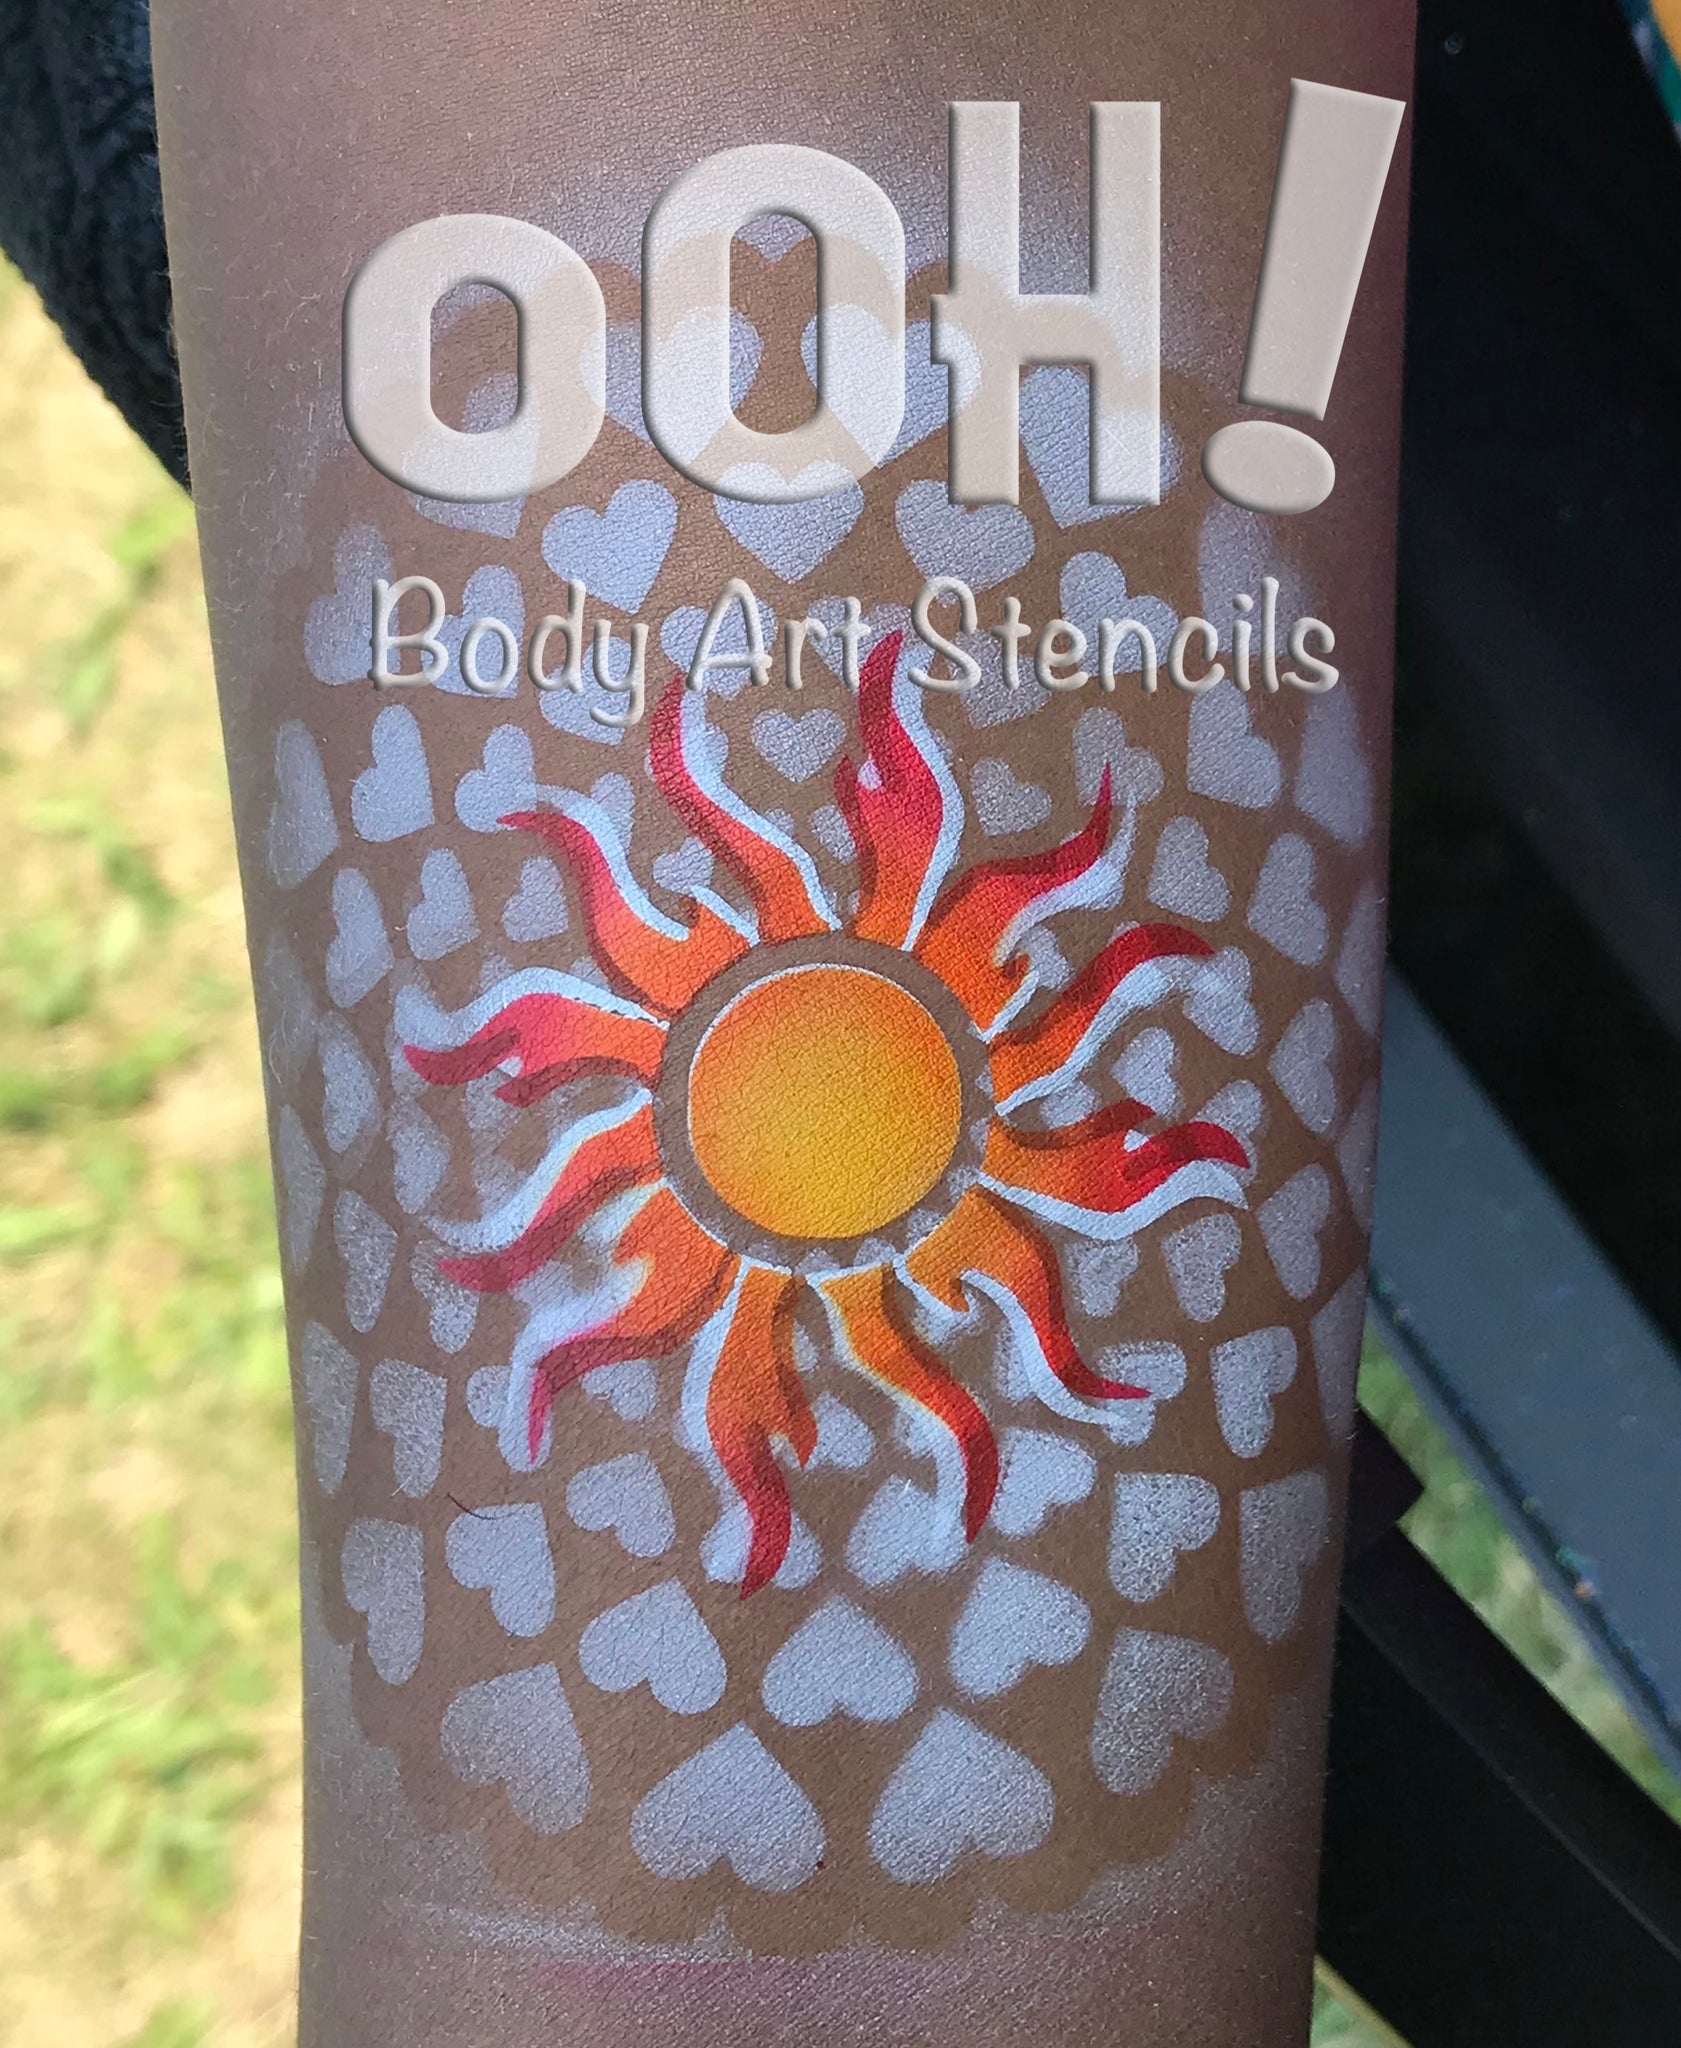 S10 Spiderweb Sphere Airbrush & Face Paint Stencil – Ooh! Body Art